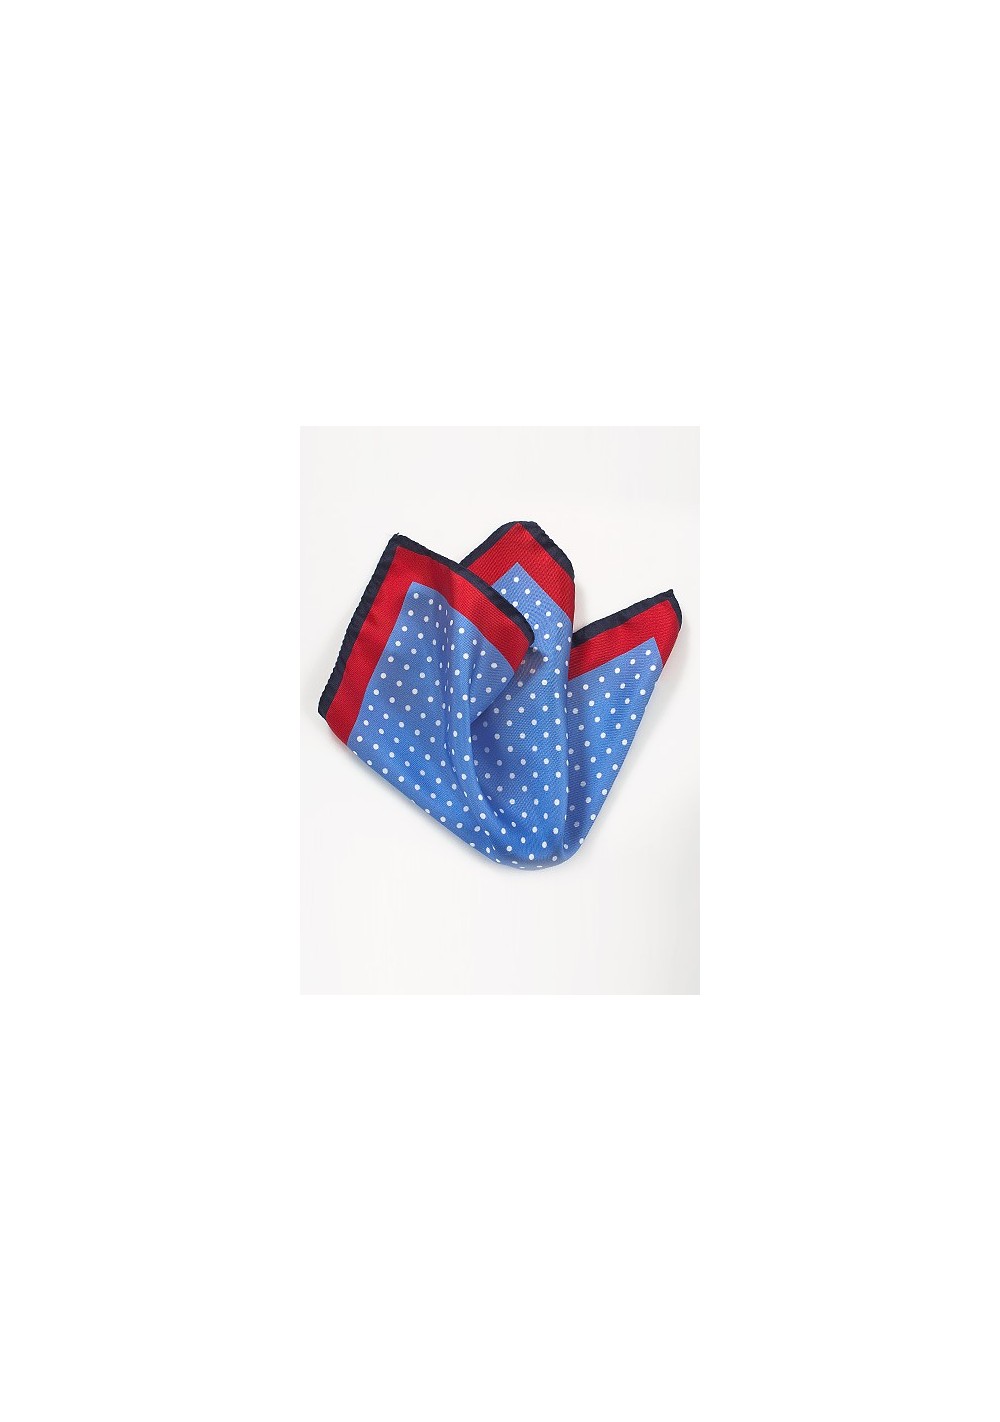 Silk Polka Dot Pocket Square in Blue and Red